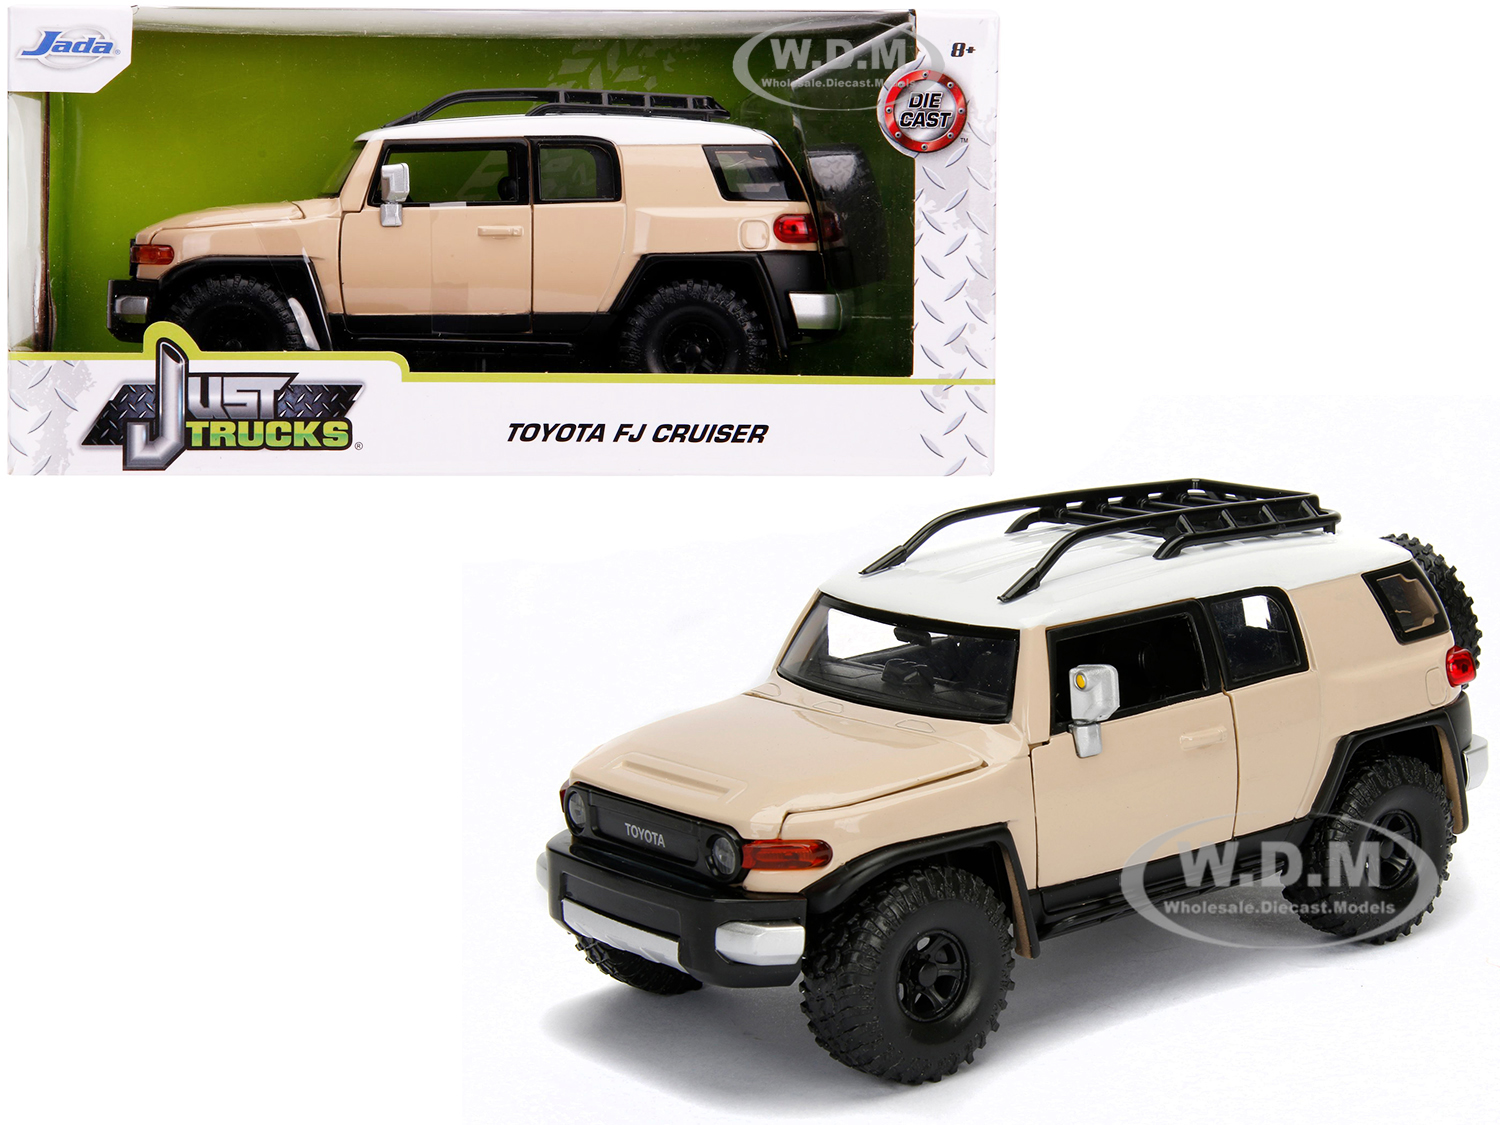 Toyota Fj Cruiser With Roof Rack Beige With White Top "just Trucks" 1/24 Diecast Model Car By Jada